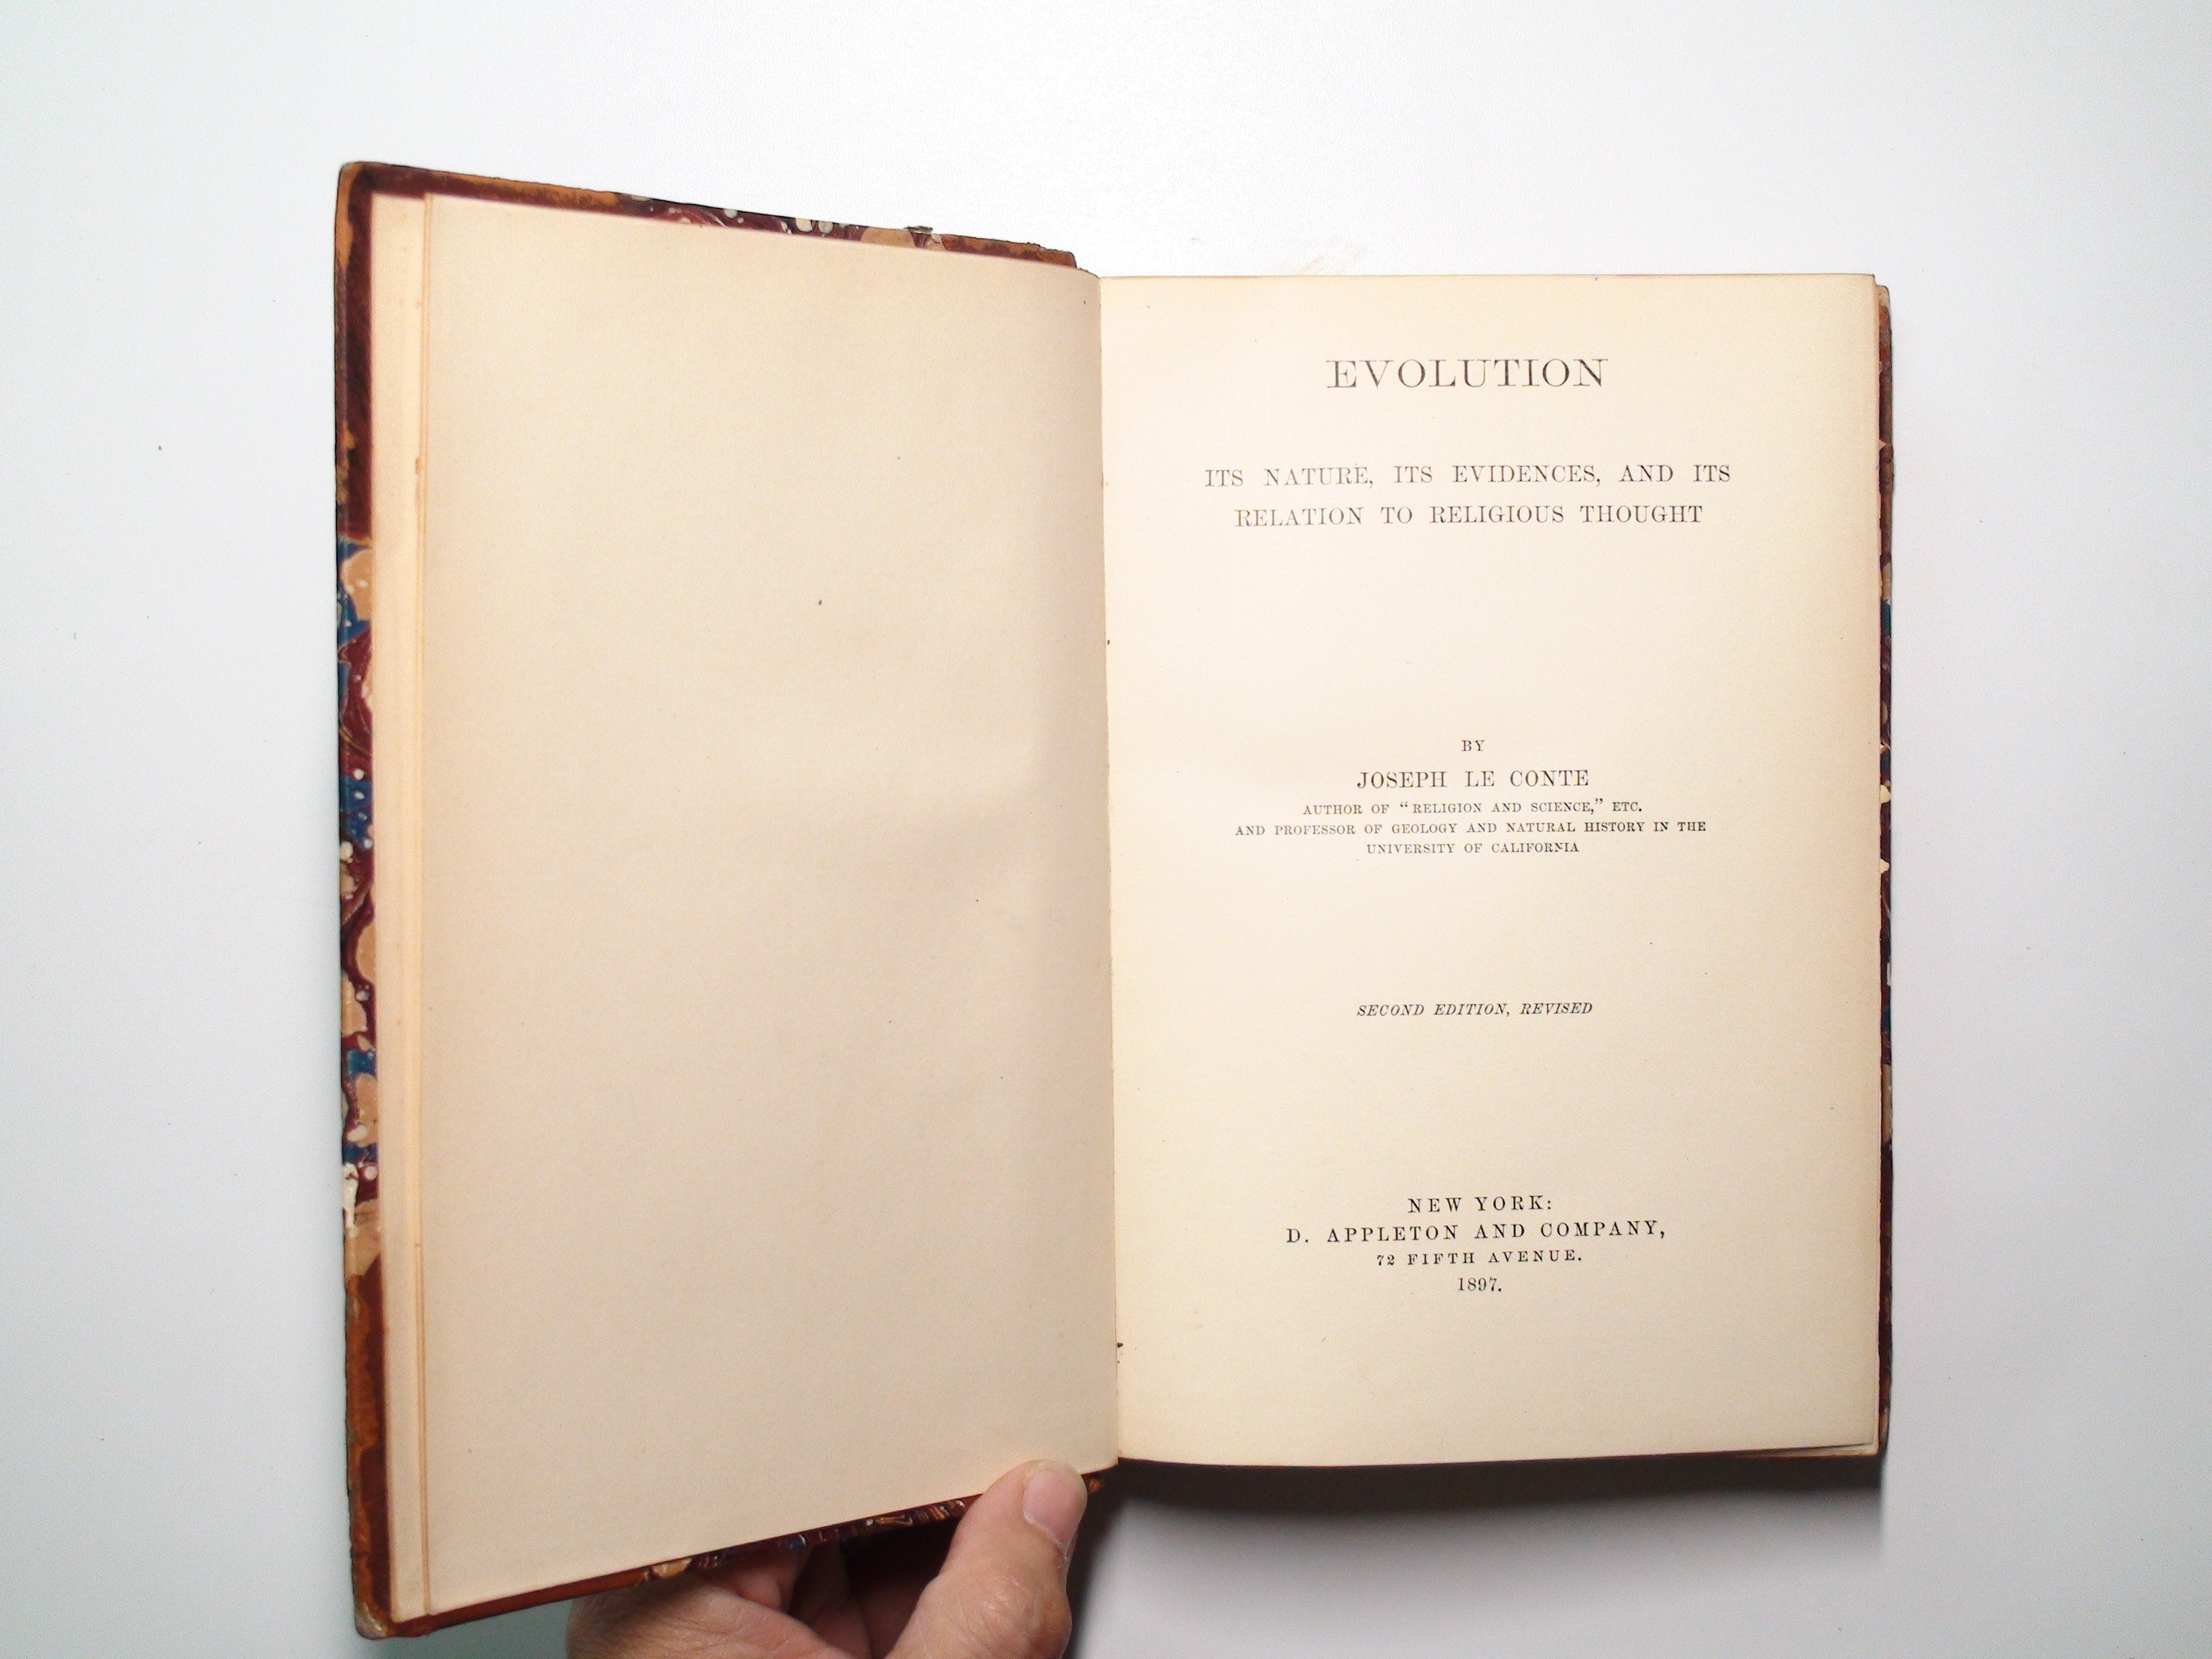 Evolution, Joseph Le Conte, Leather, 2nd Ed, Revised, Illustrated, 1897